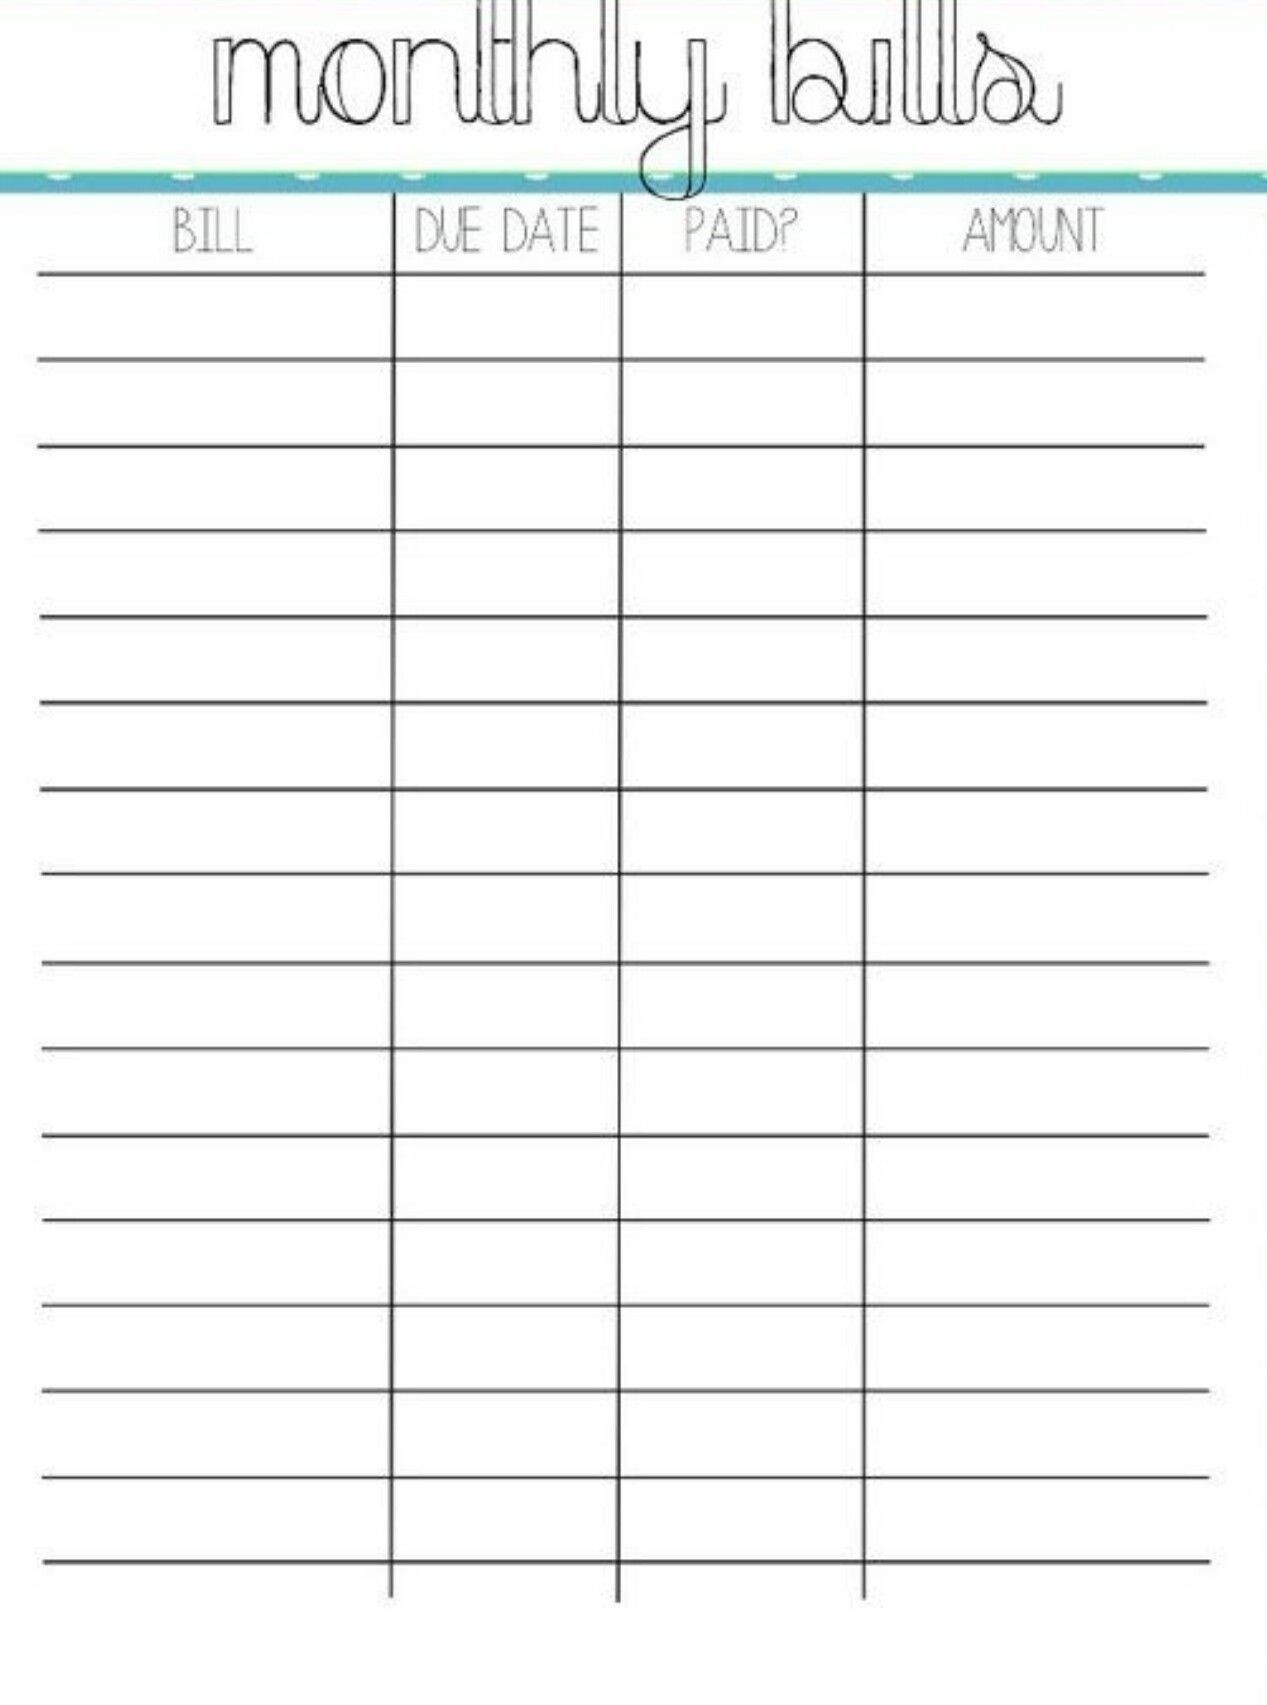 Bills Budget Spreadsheet Bill Payment Monthly Worksheet Pin  Monthly Payment Worbook